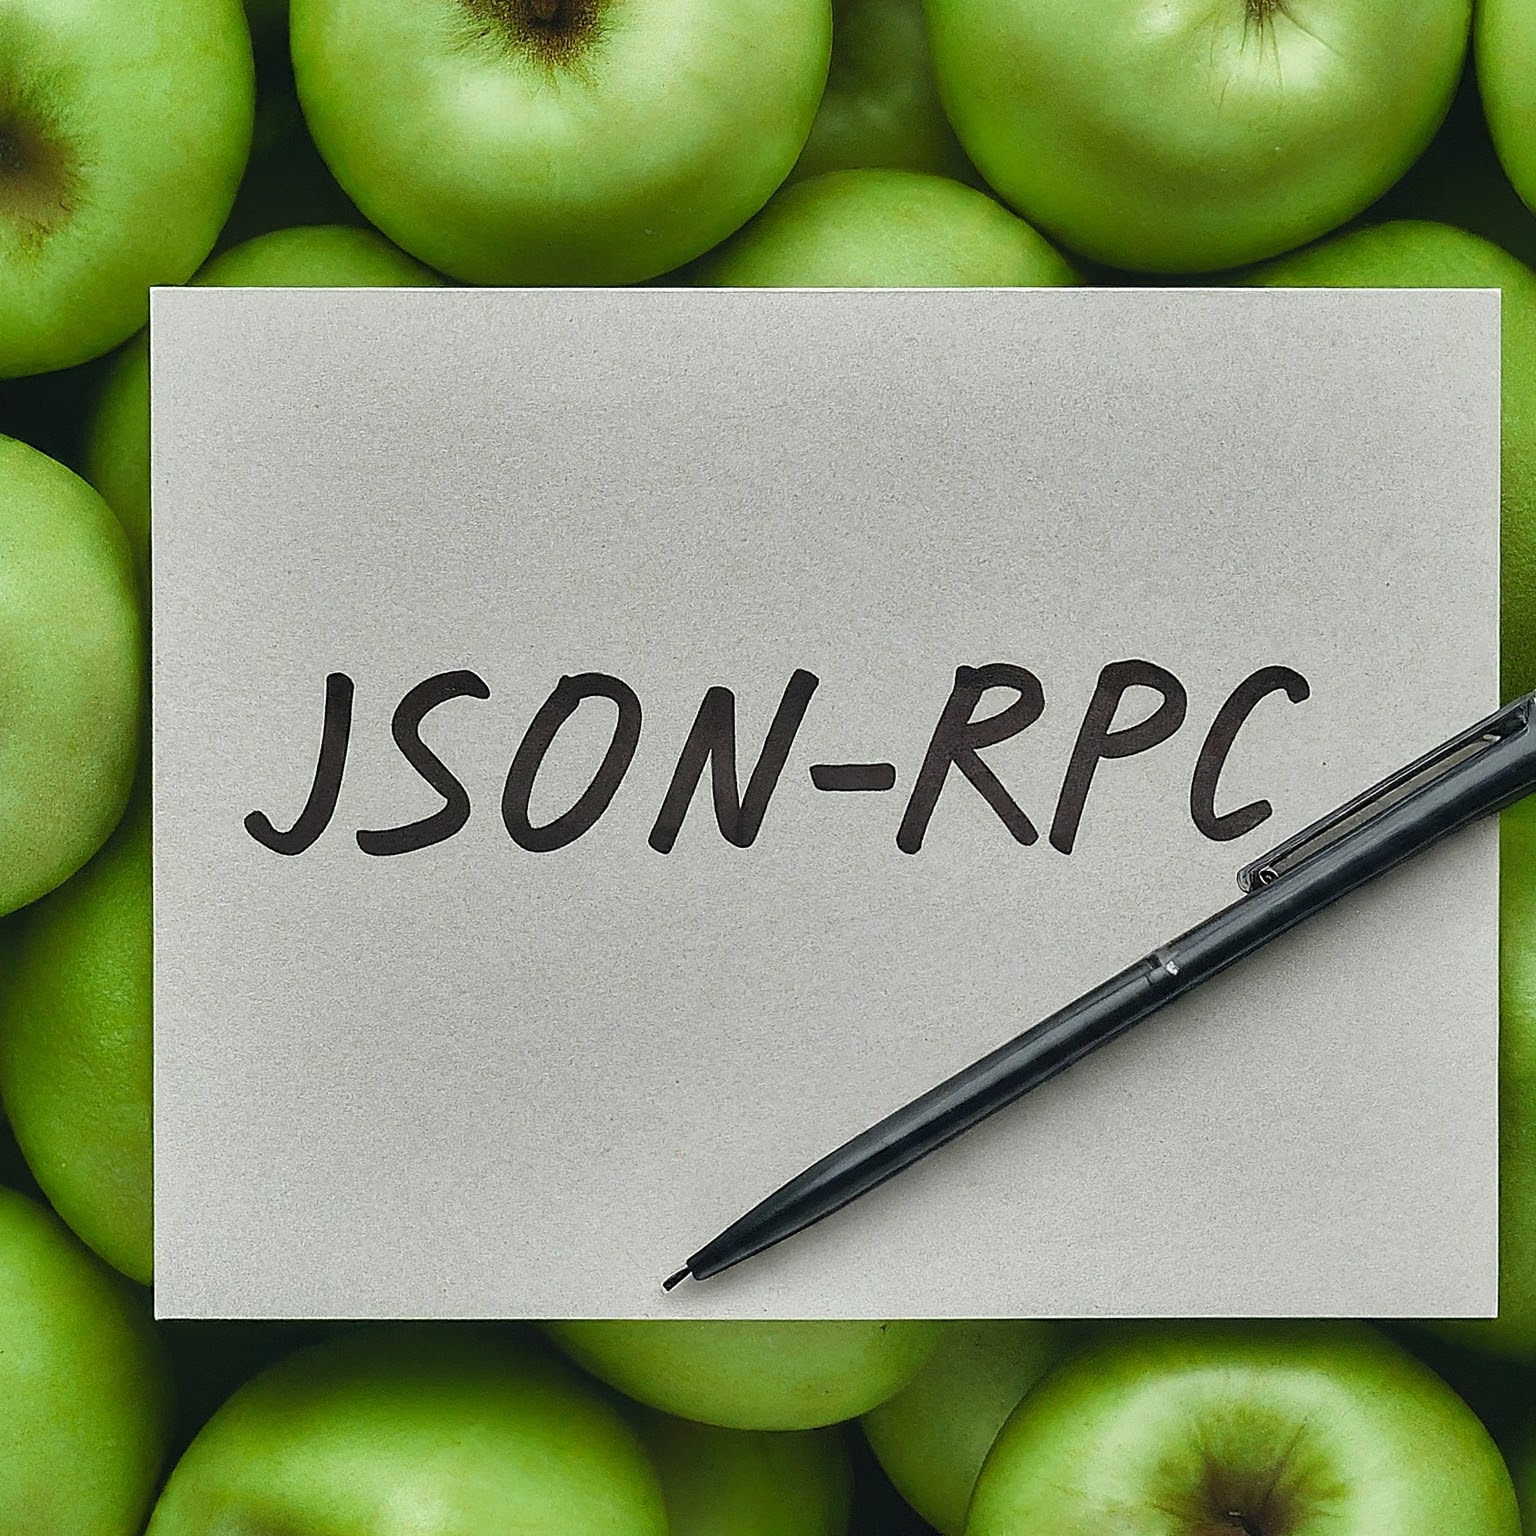 What is Json-RPC?